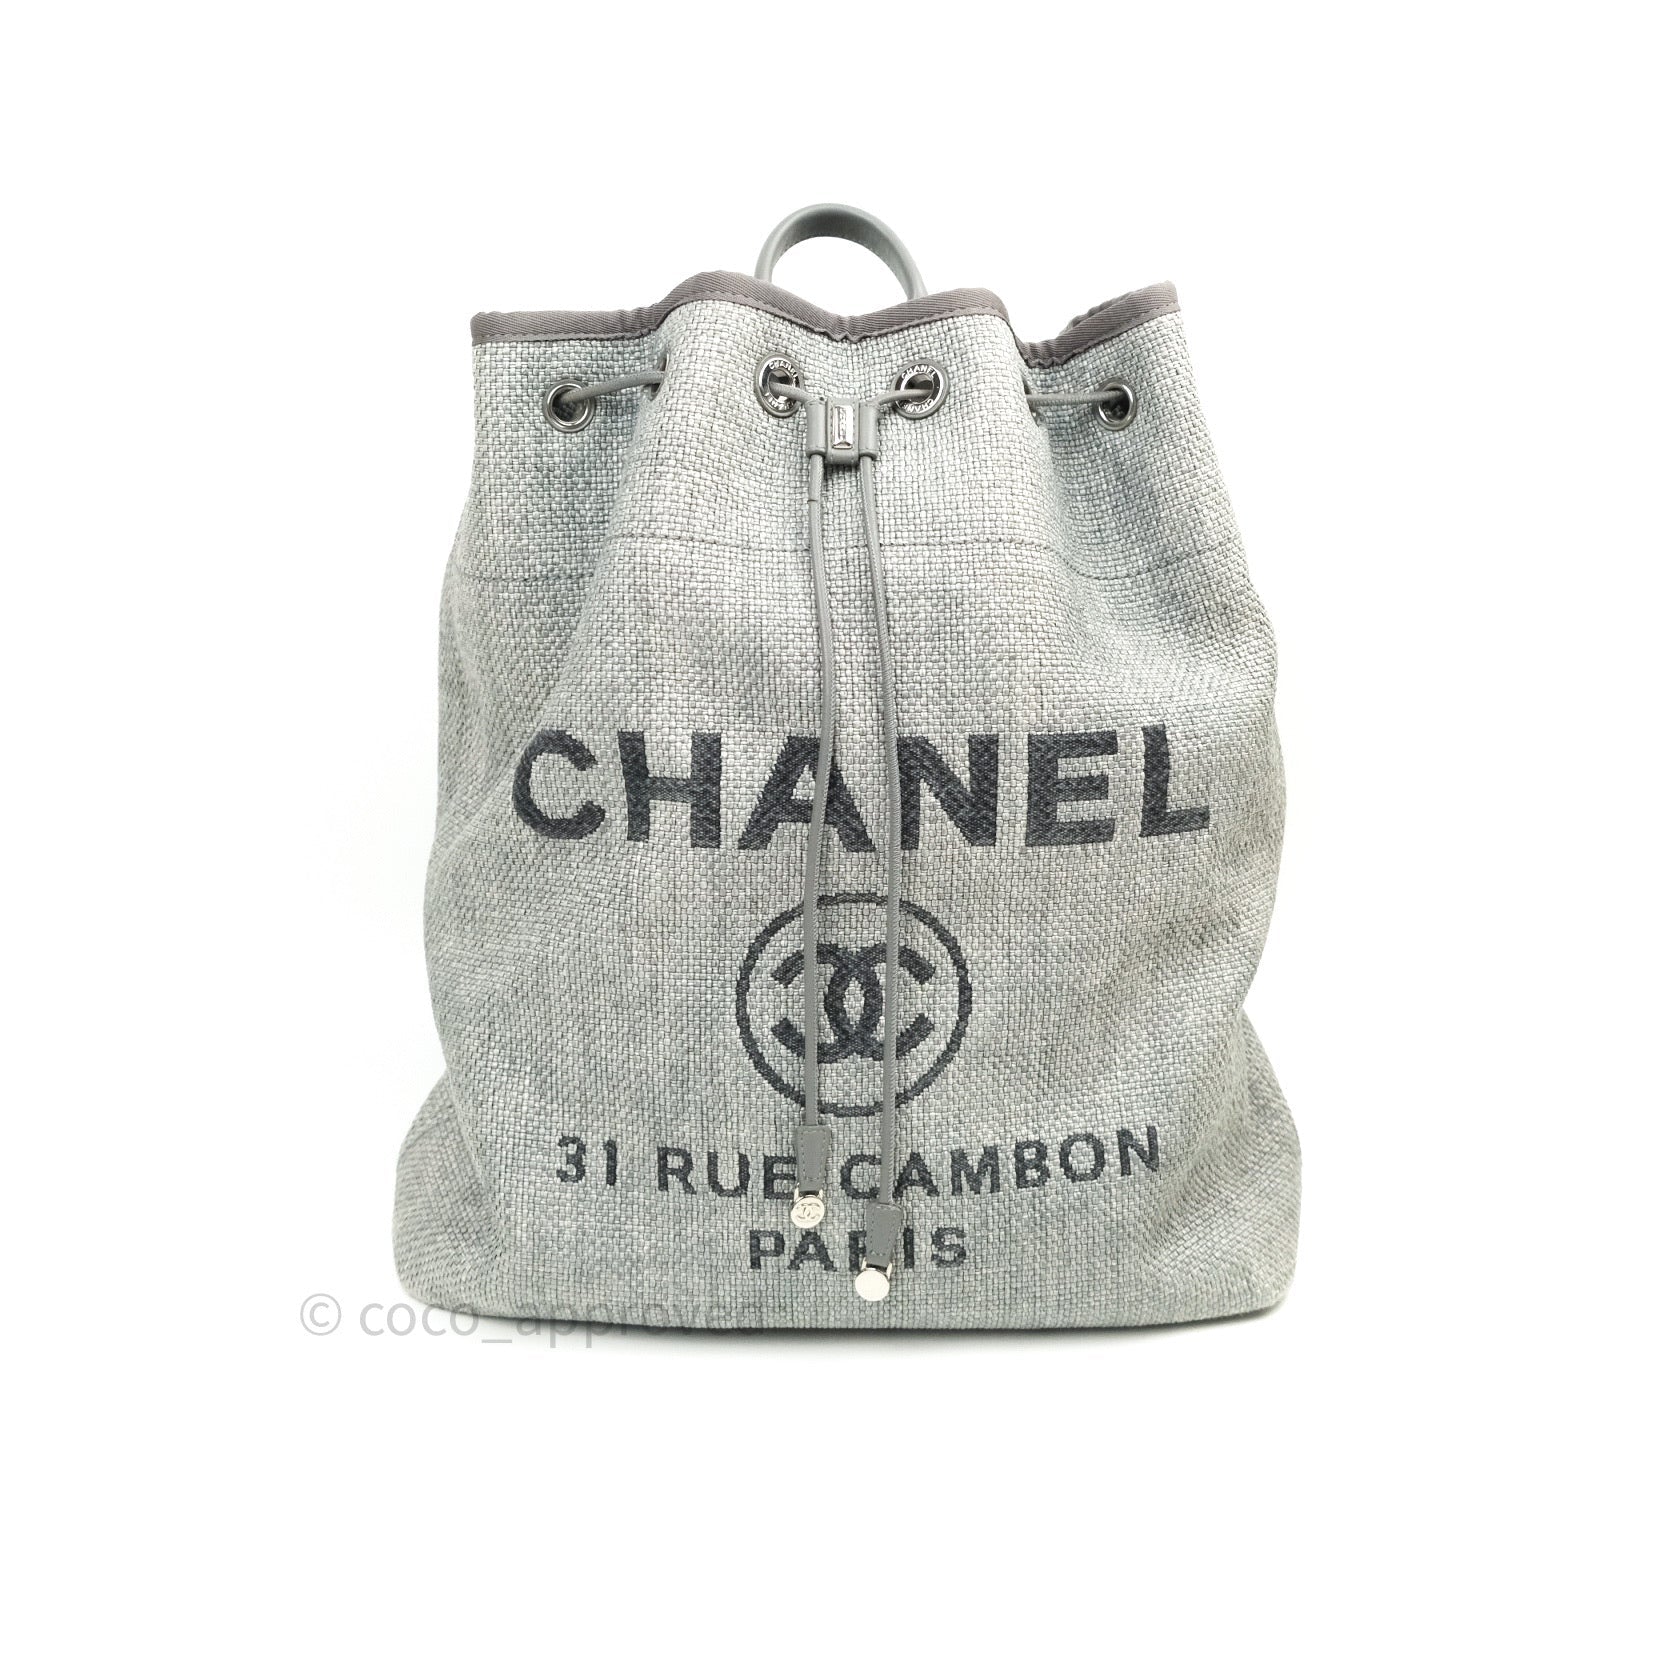 Chain - obsessed mini me in the store one day - Deauville - A67001 – out  for a Chanel - CHANEL - Bag - White - Canvas - Pink - Chanel in pelle tacco  9cm - Tote - Leather